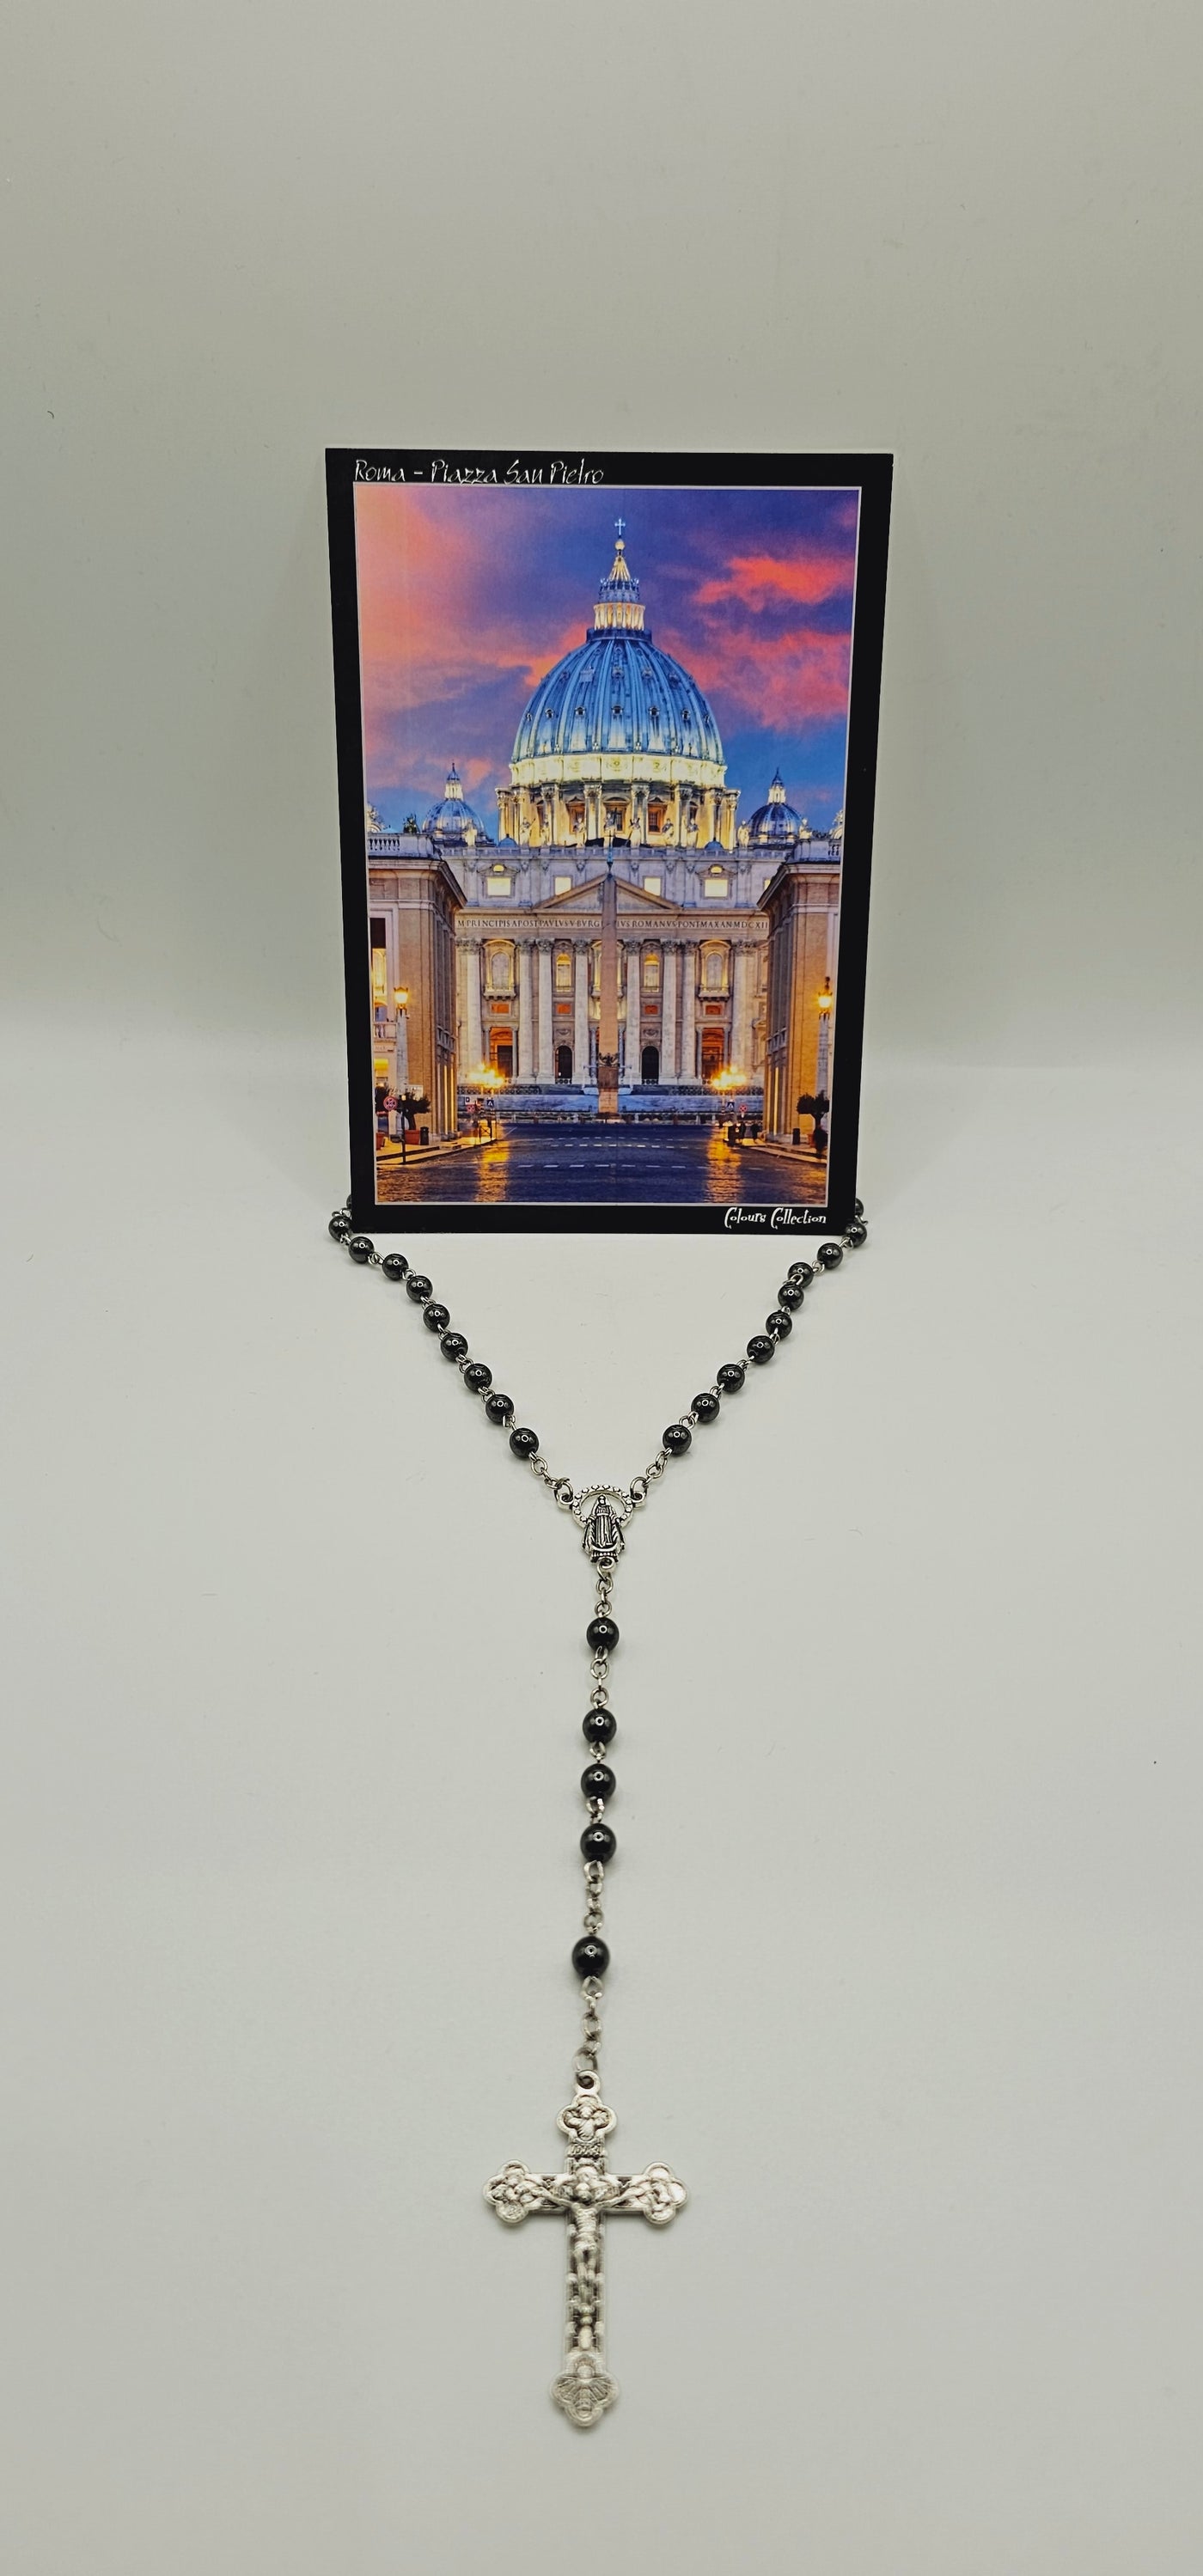 SILVER ROSARY - ST PETER BASILICA